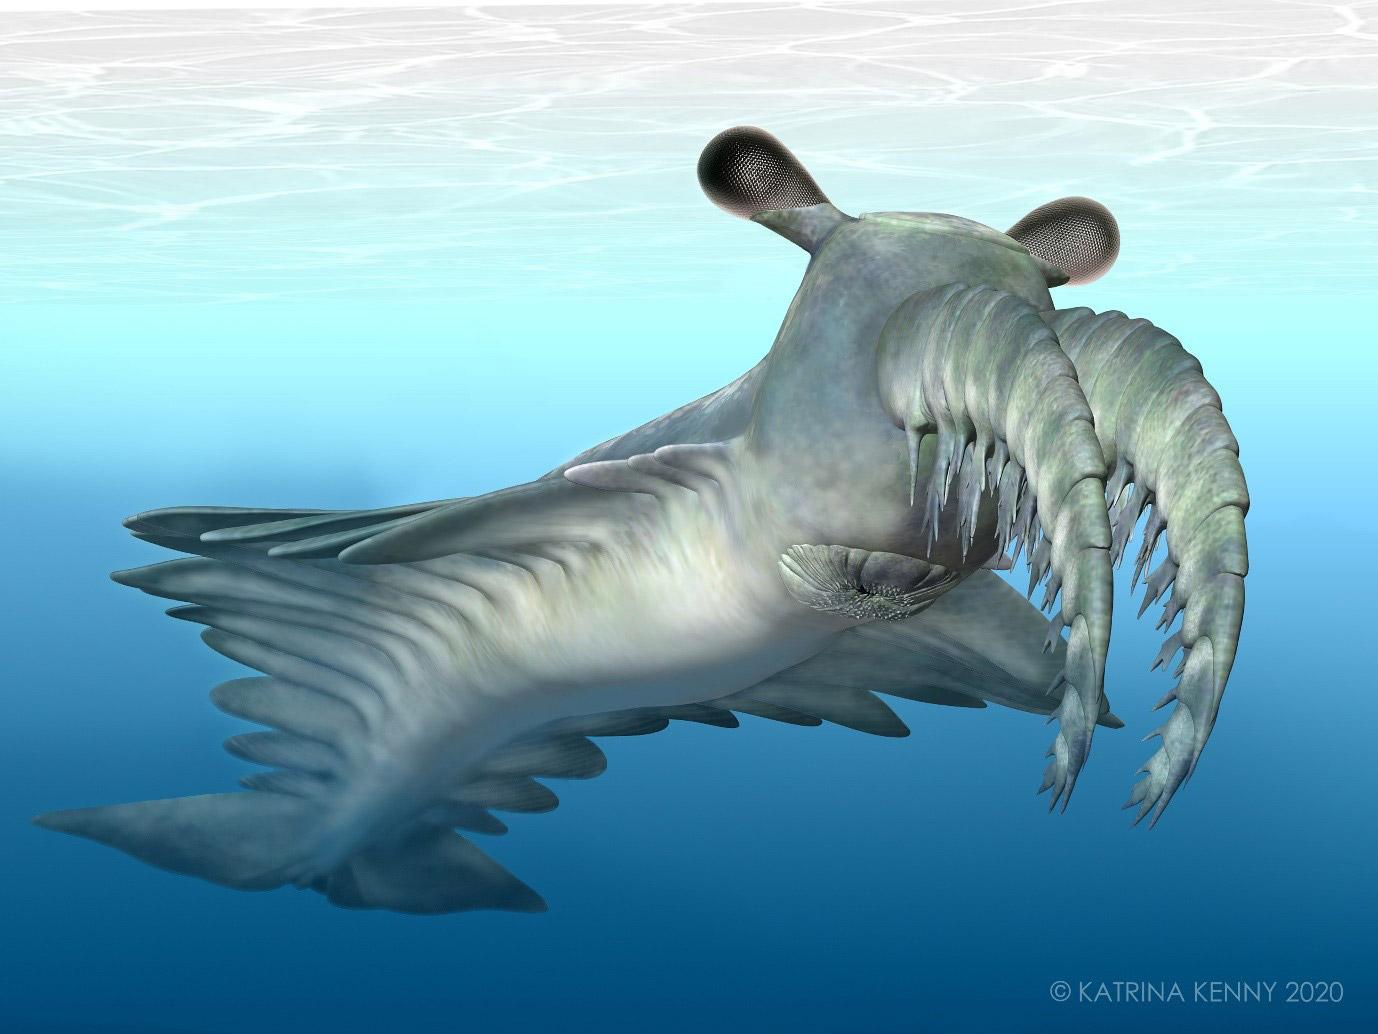 The radiodont Anomalocaris, with its large stalked eyes, is considered a top predator that swam in the oceans over 500 million years ago.